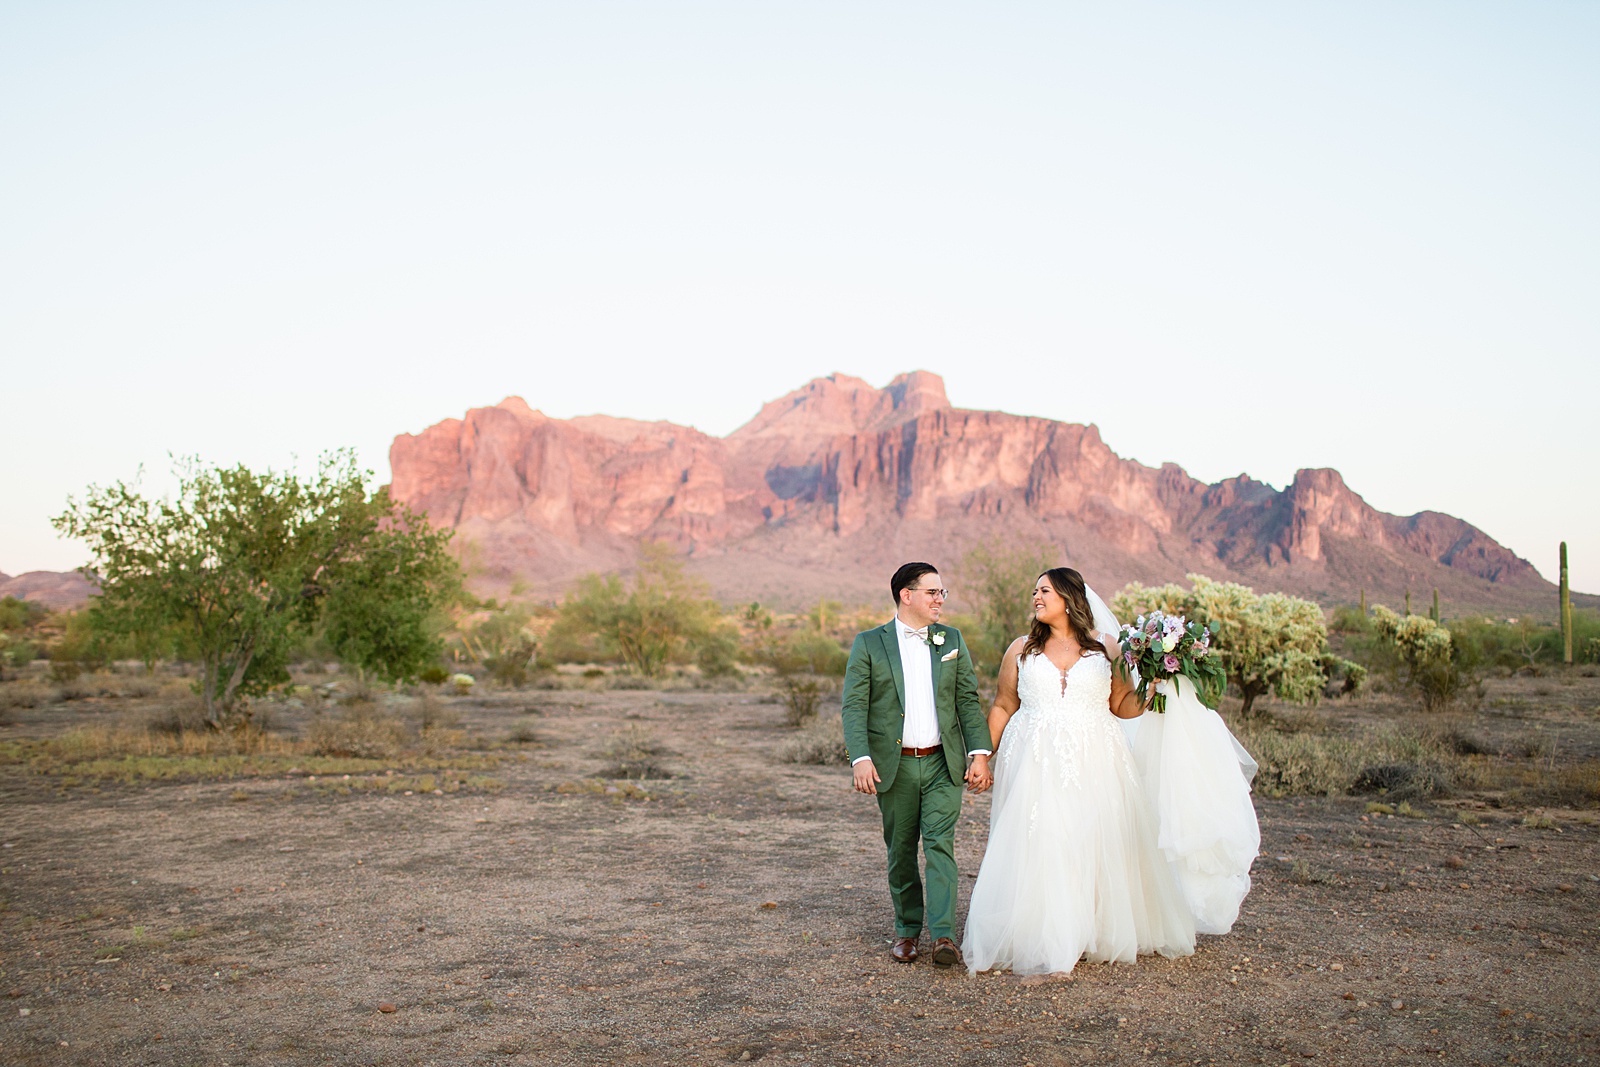 Bride & Groom walking together during their a Phoenix desert intimate wedding by Phoenix wedding photographer Juniper and Co Photography.